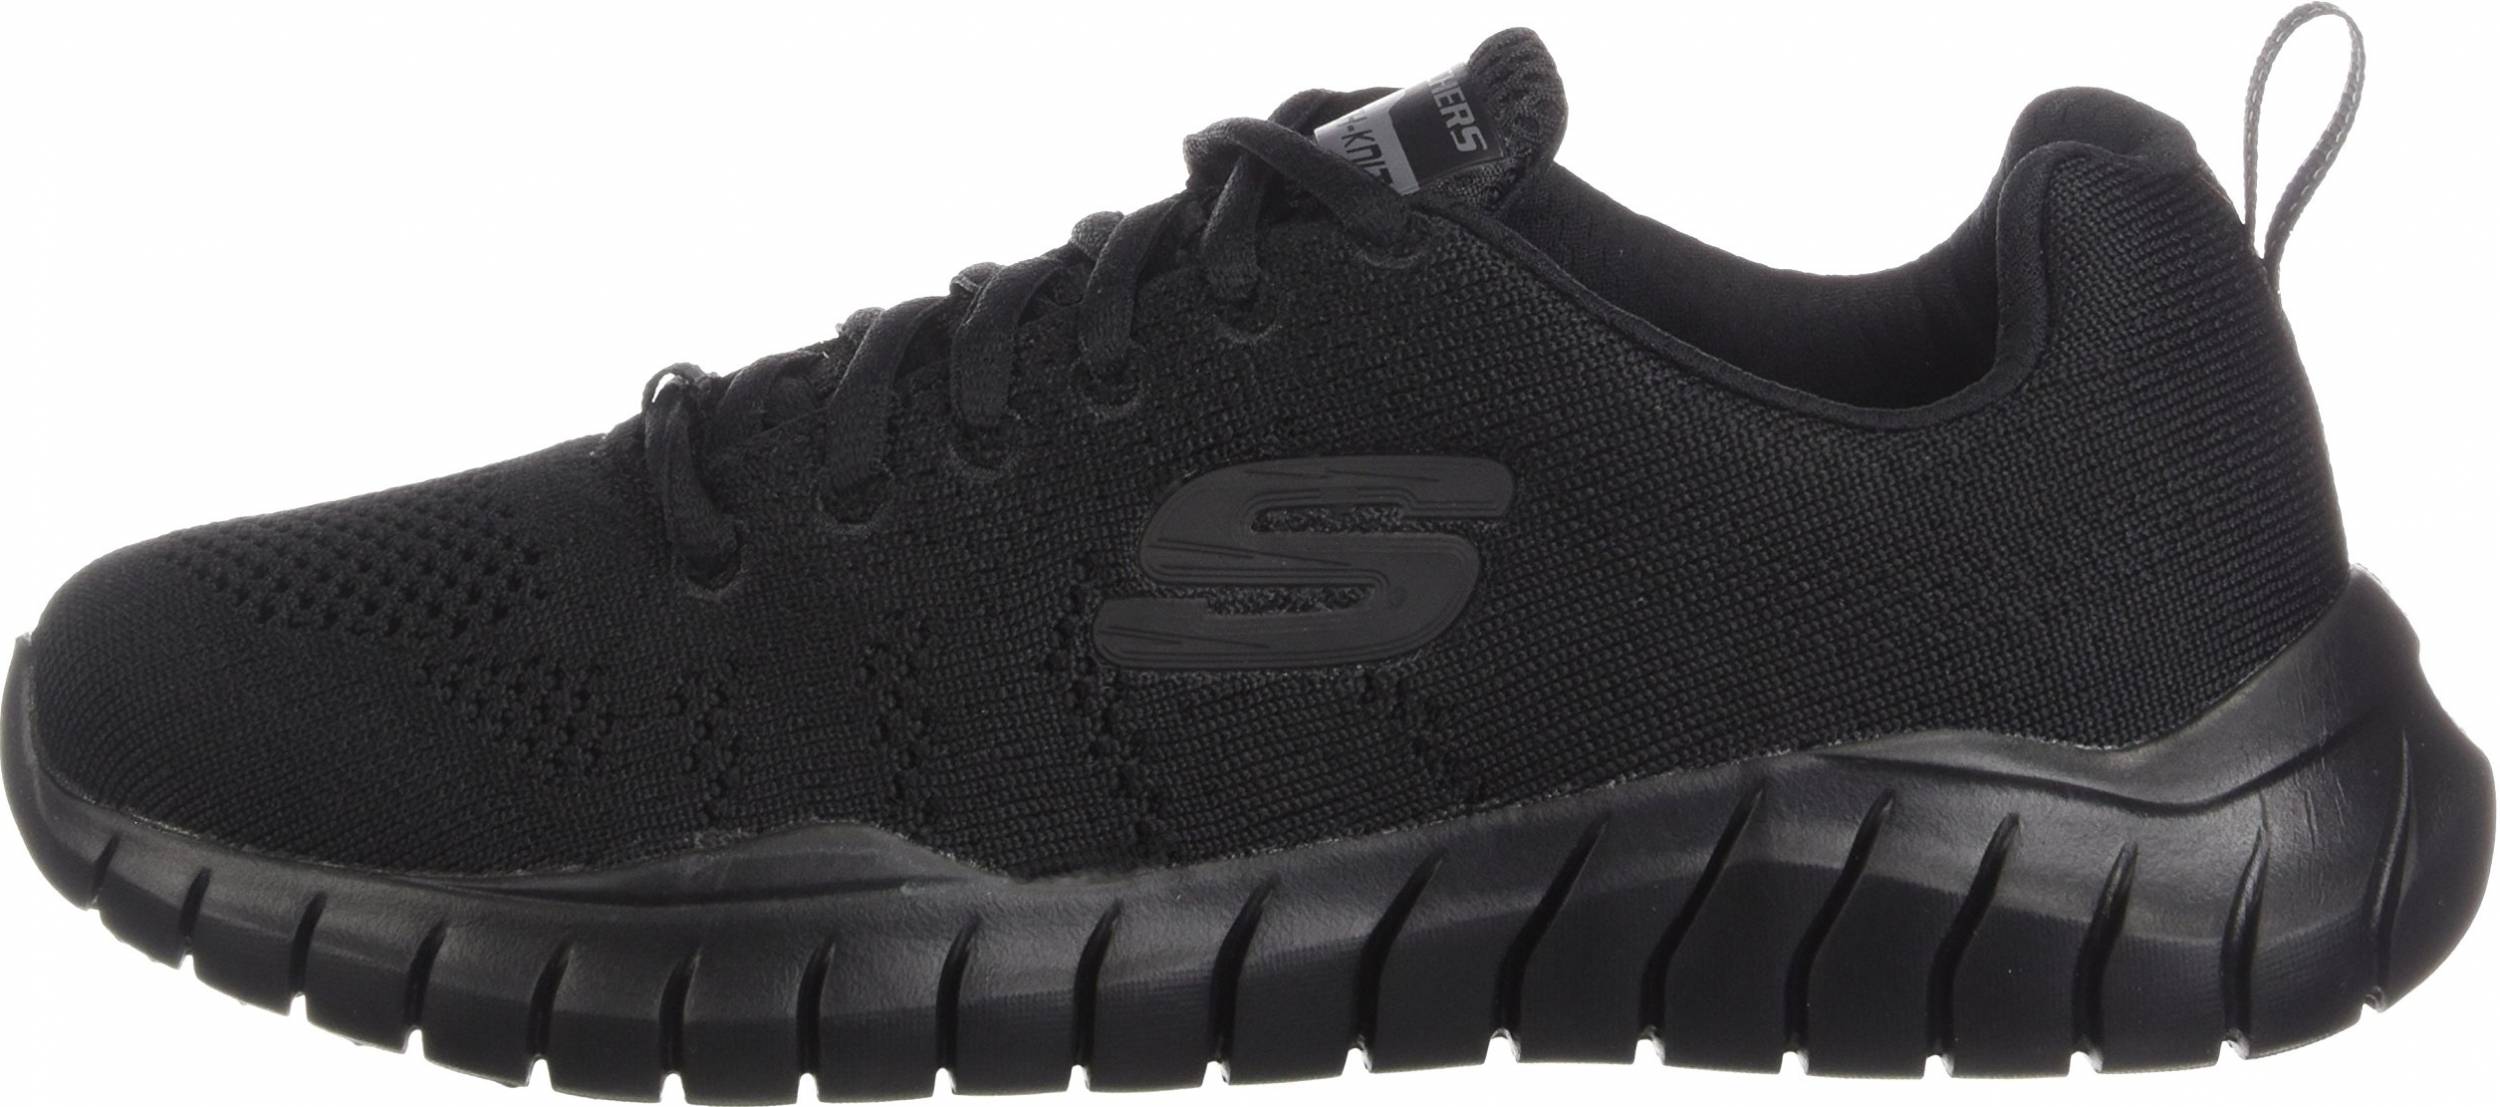 Save 41% on Cheap Training Shoes (33 